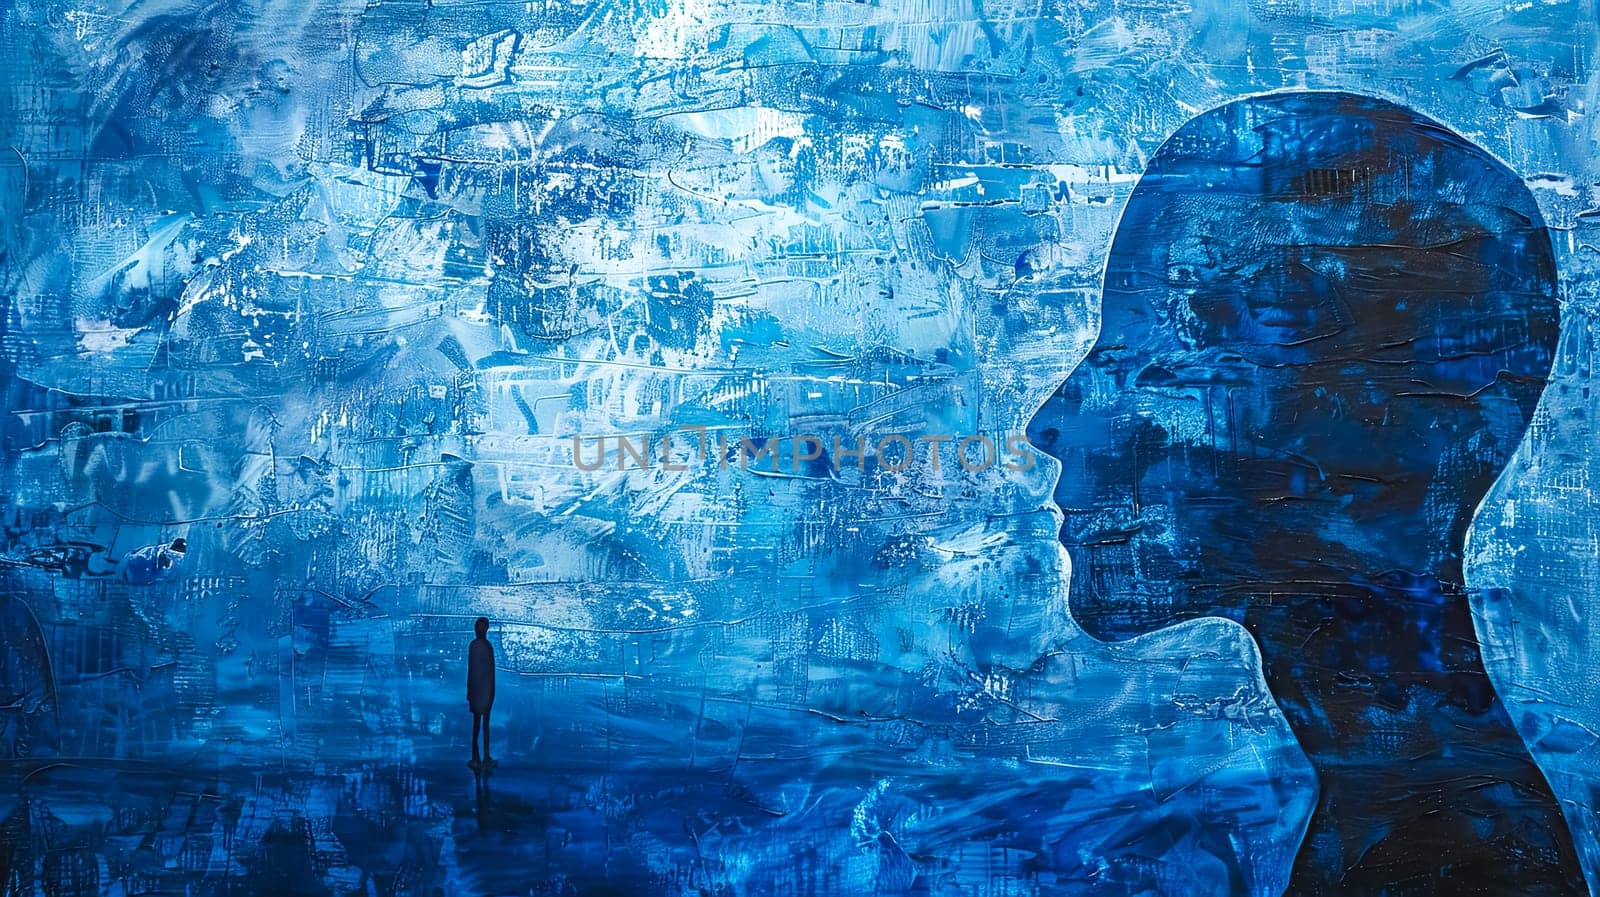 Blue-hued painting featuring a profile silhouette with a contemplative mood